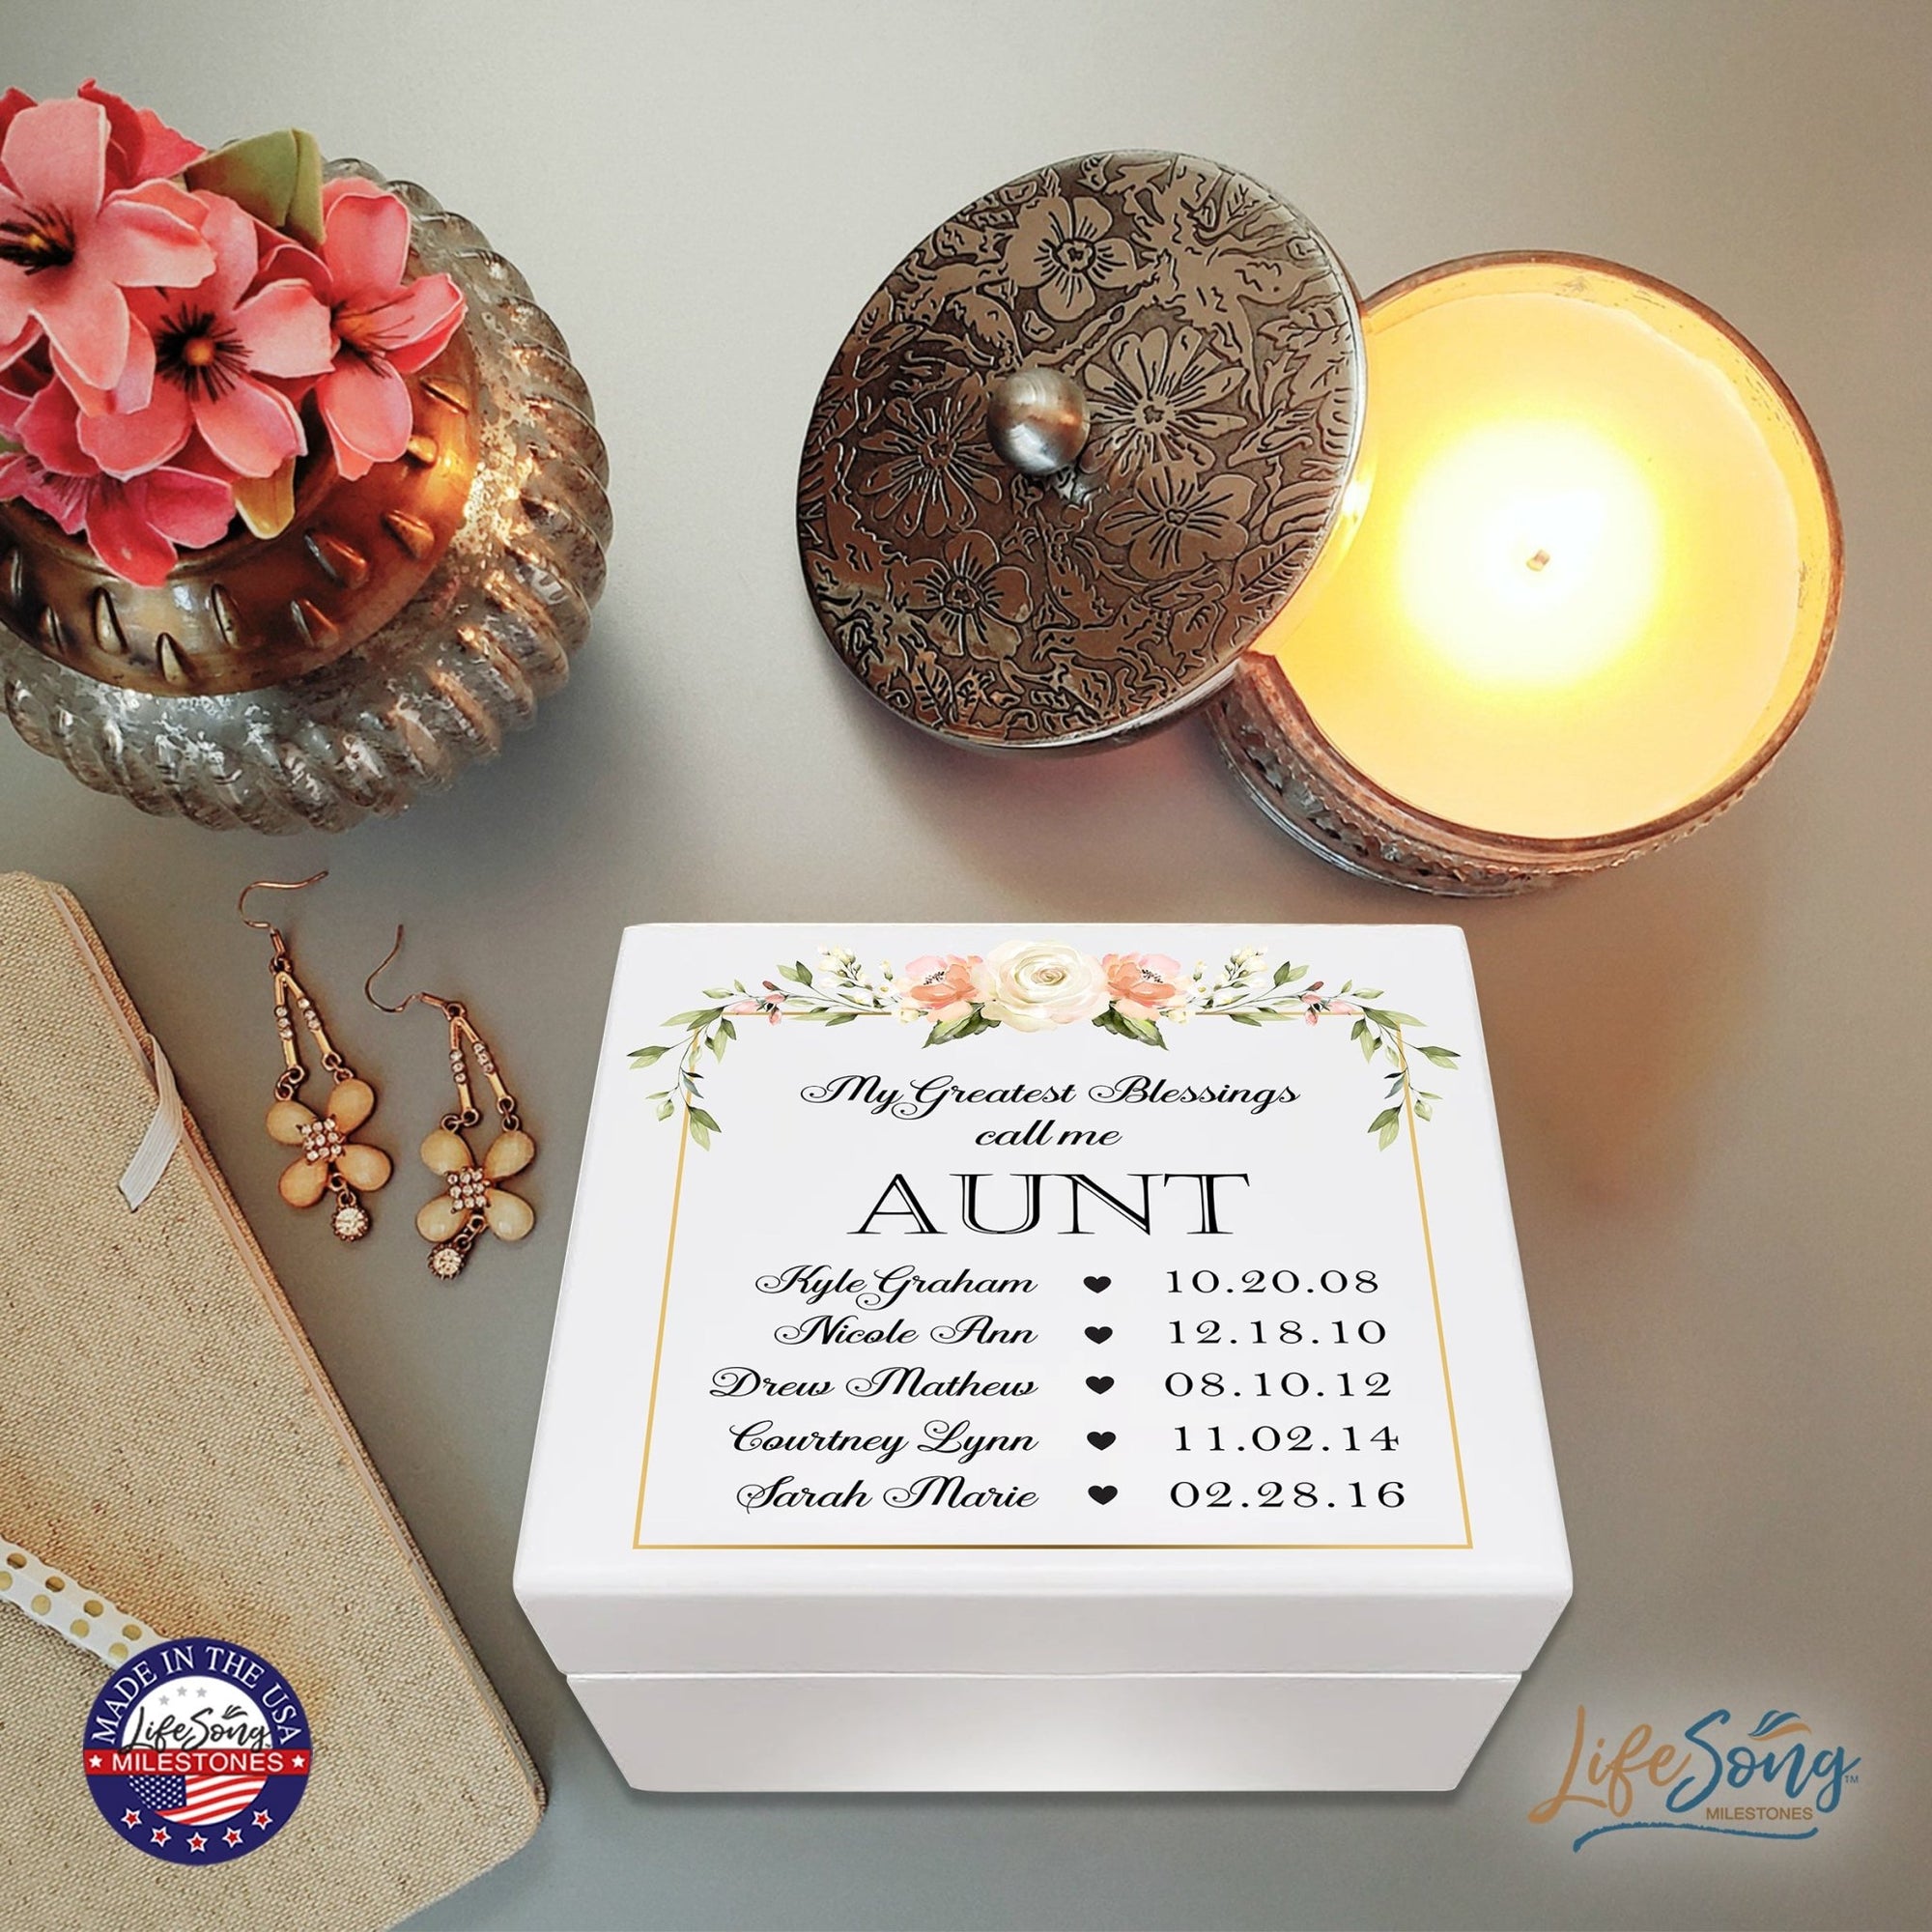 Personalized Memorable Aunt’s White Keepsake Box 6x5.5in with inspiring verse - Greatest Blessings - LifeSong Milestones